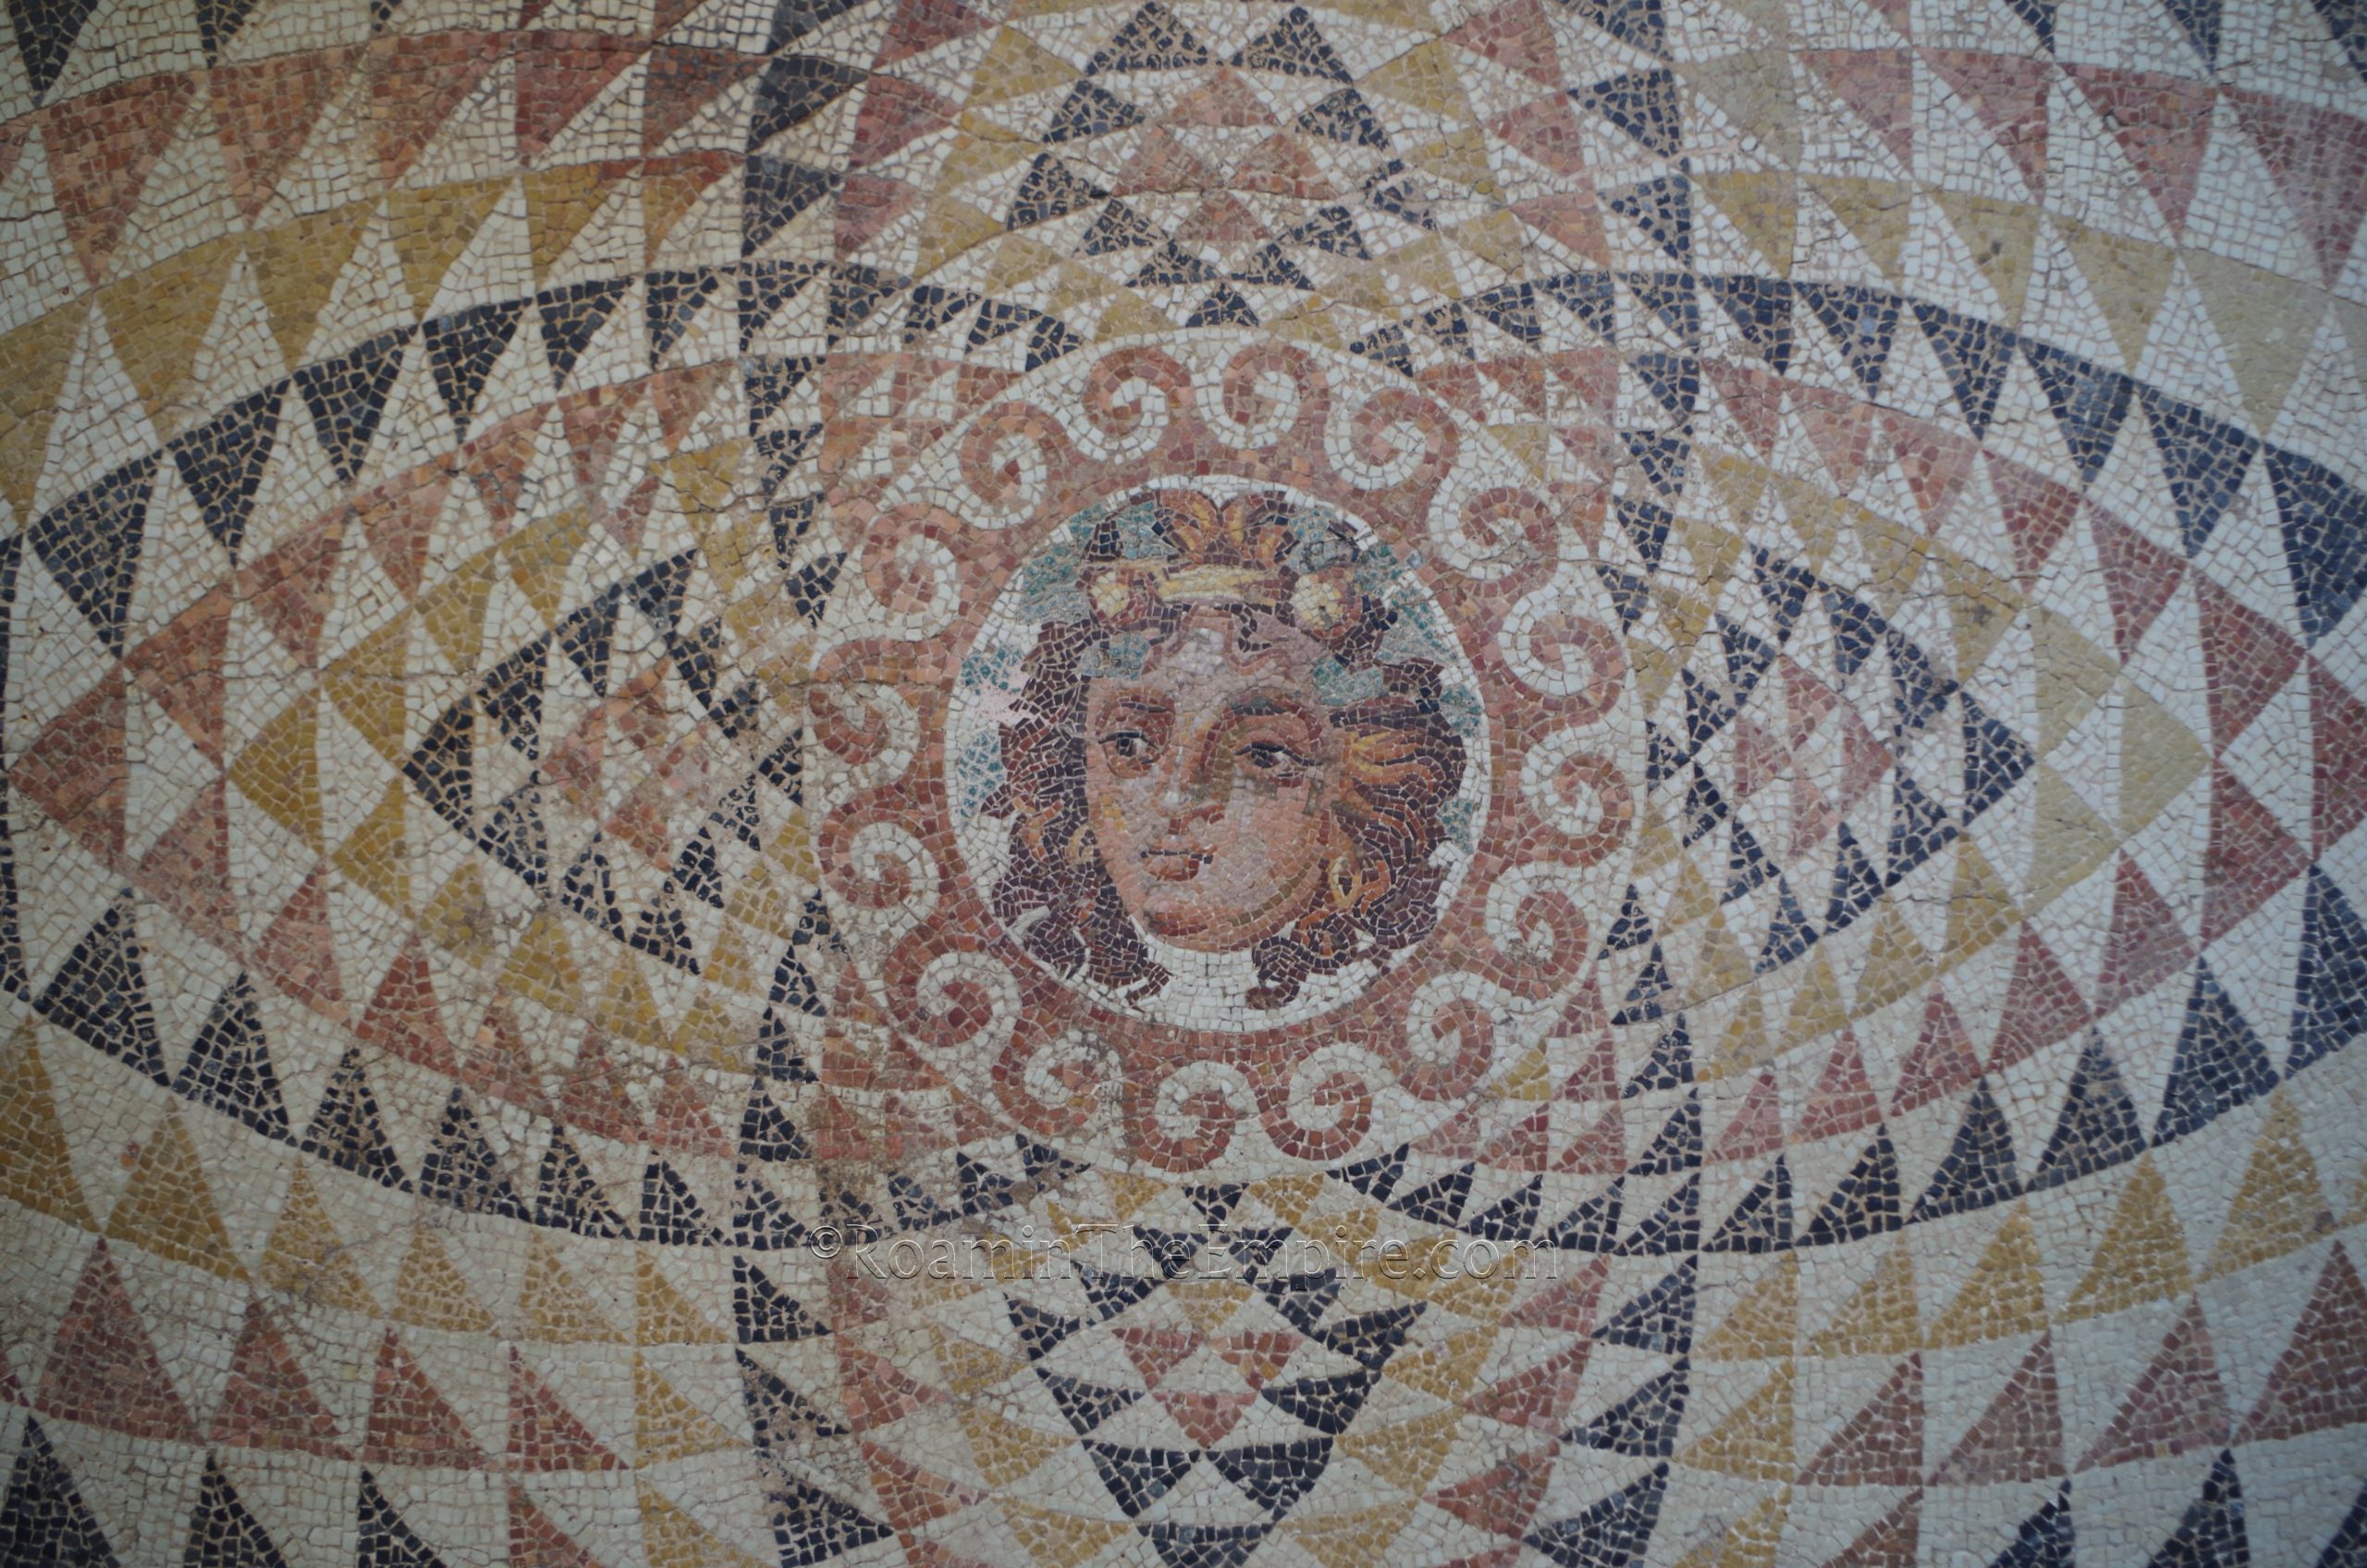 Detail of the Dionysus mosaic. Dated to the 2nd-3rd century CE. Corinth Museum.